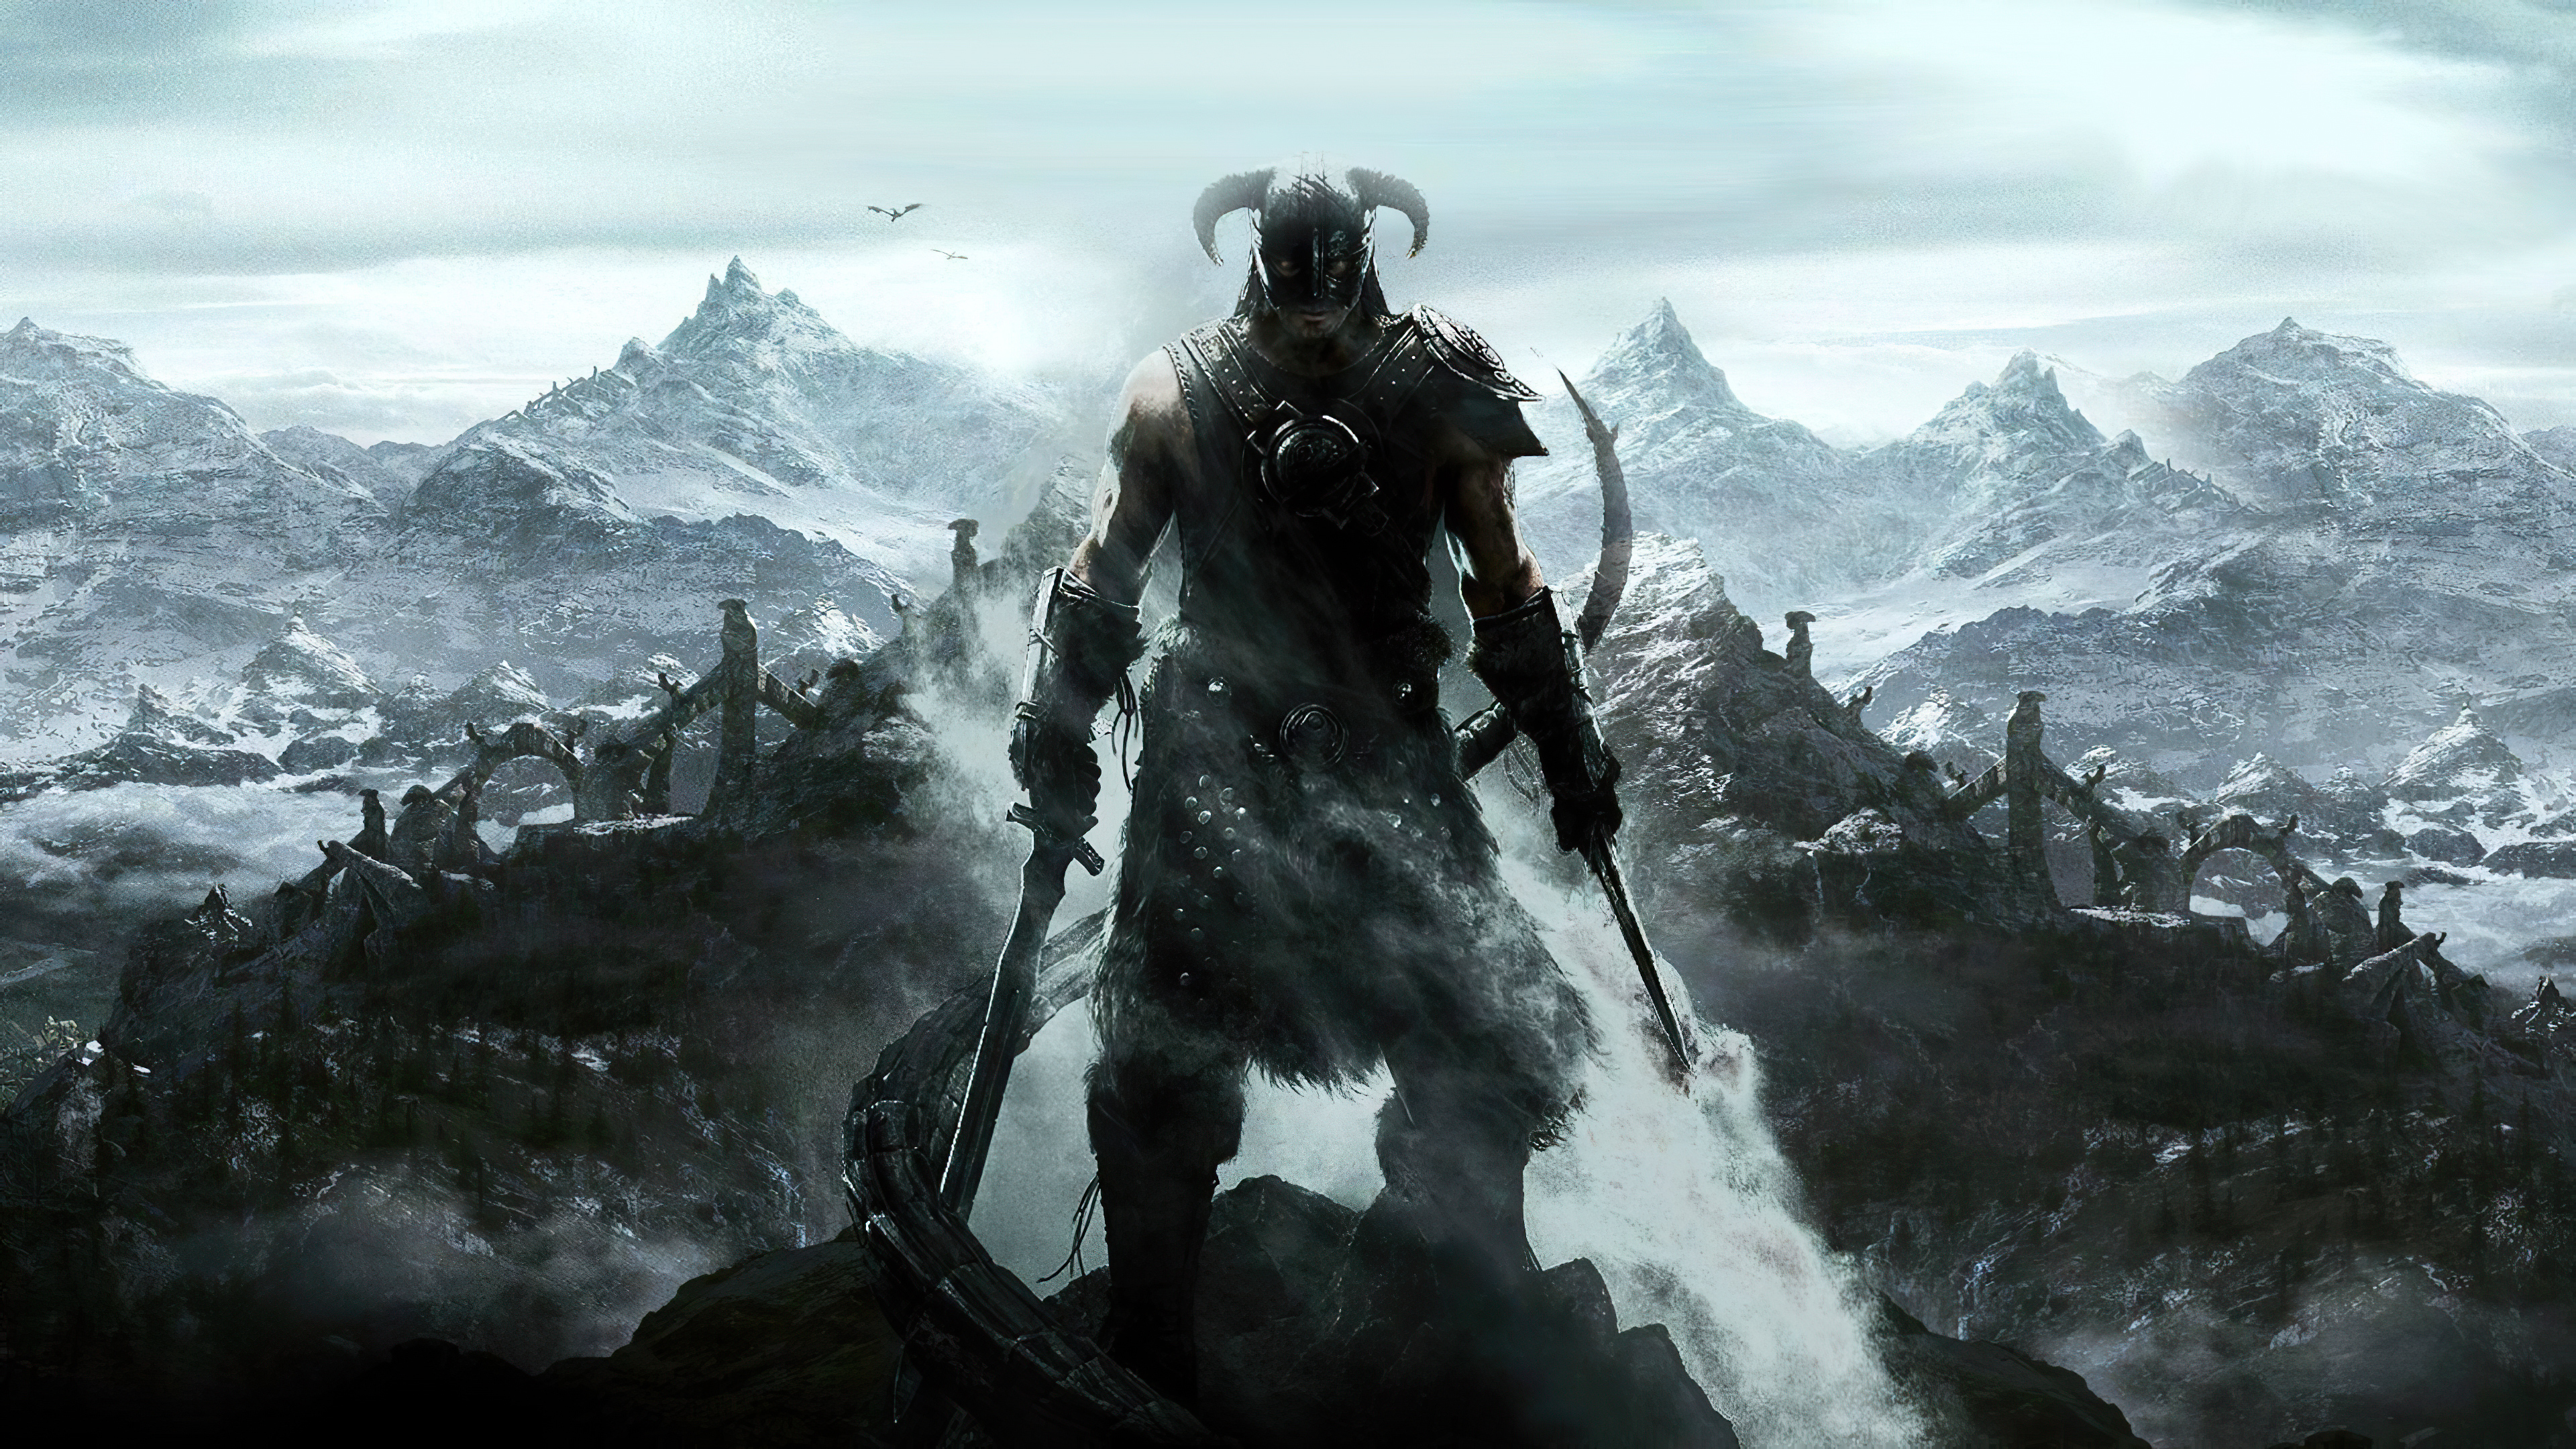 Skyrim wallpaper k hd games k wallpapers images backgrounds photos and pictures